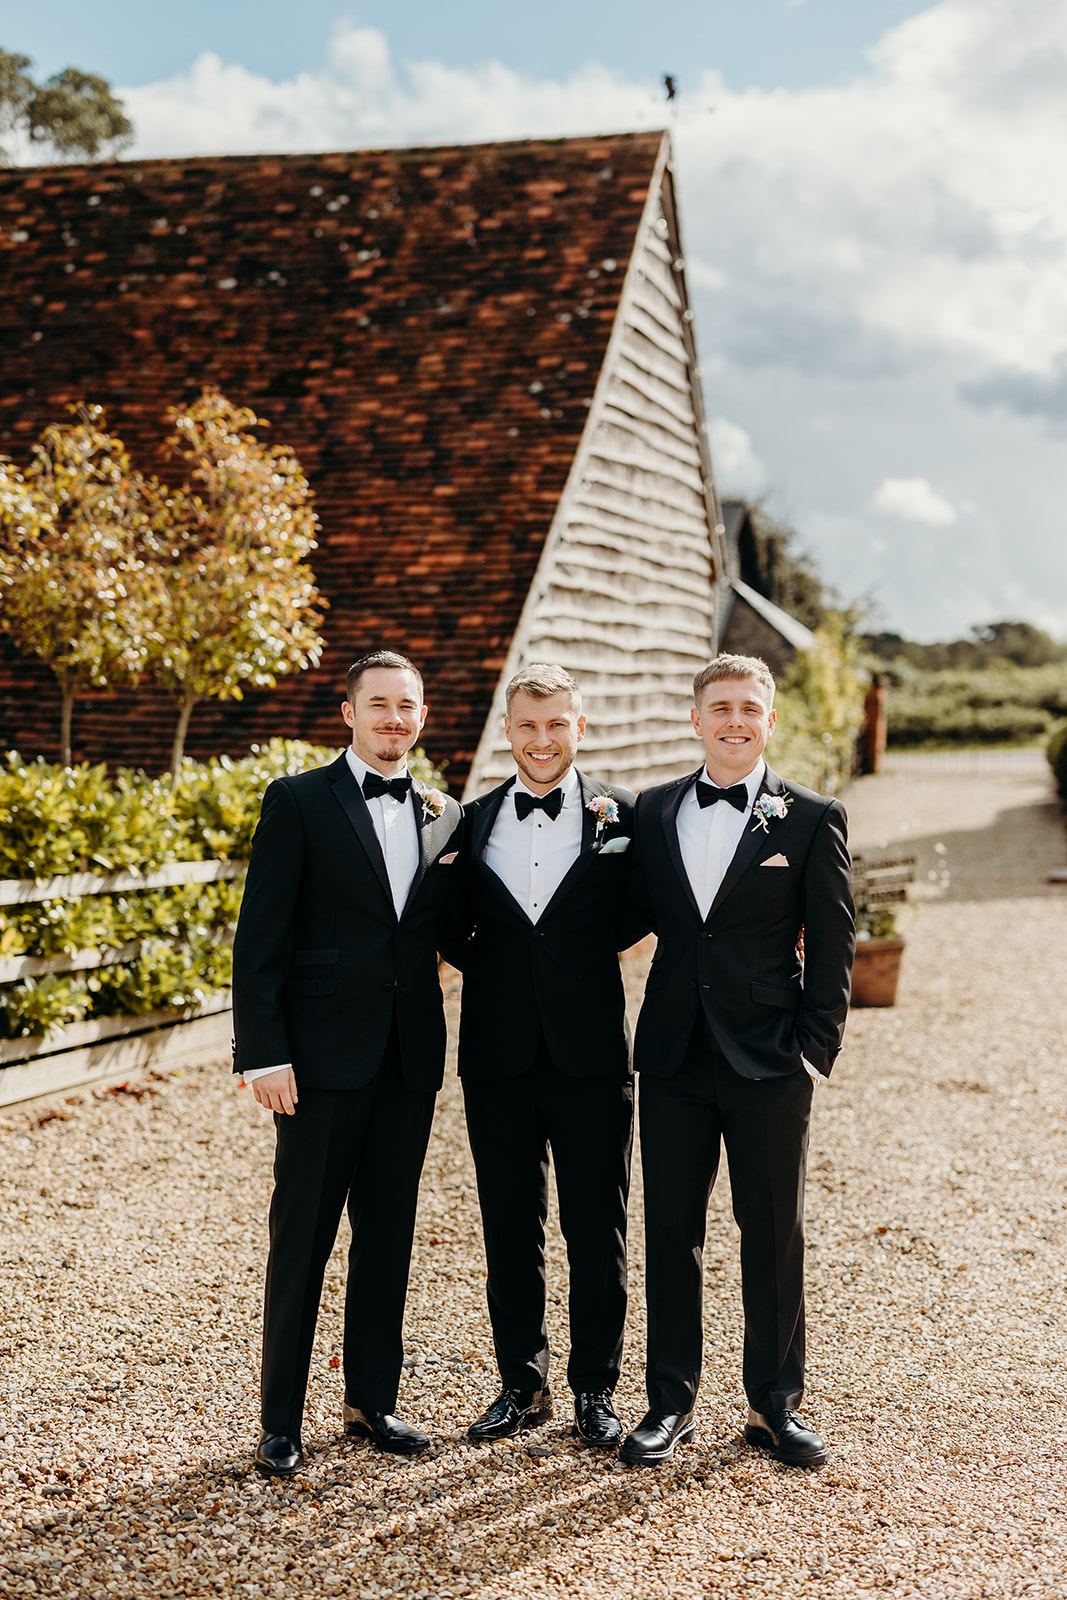 Groom and his groomsmen looking dapper in their wedding attire at Silchester Farm.